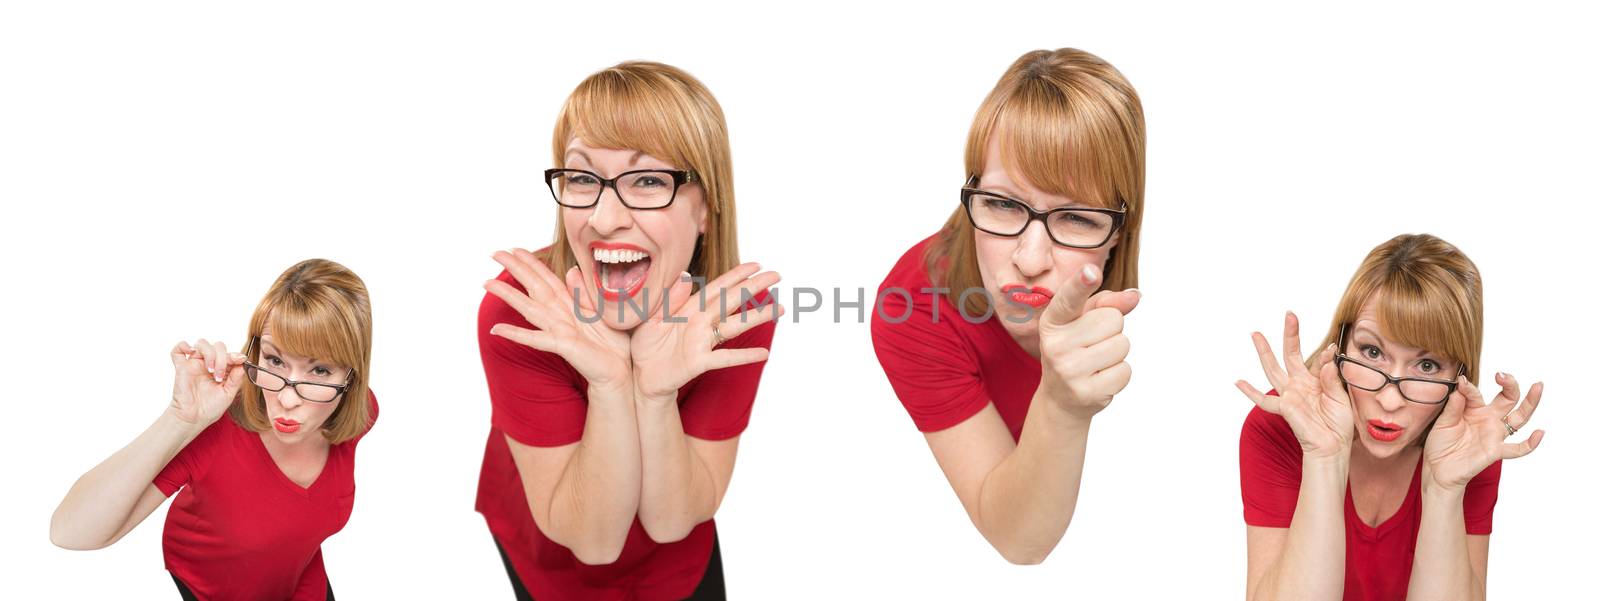 Set of Female Caucasian with Goofy Expressions Isolated on a White Background by Feverpitched